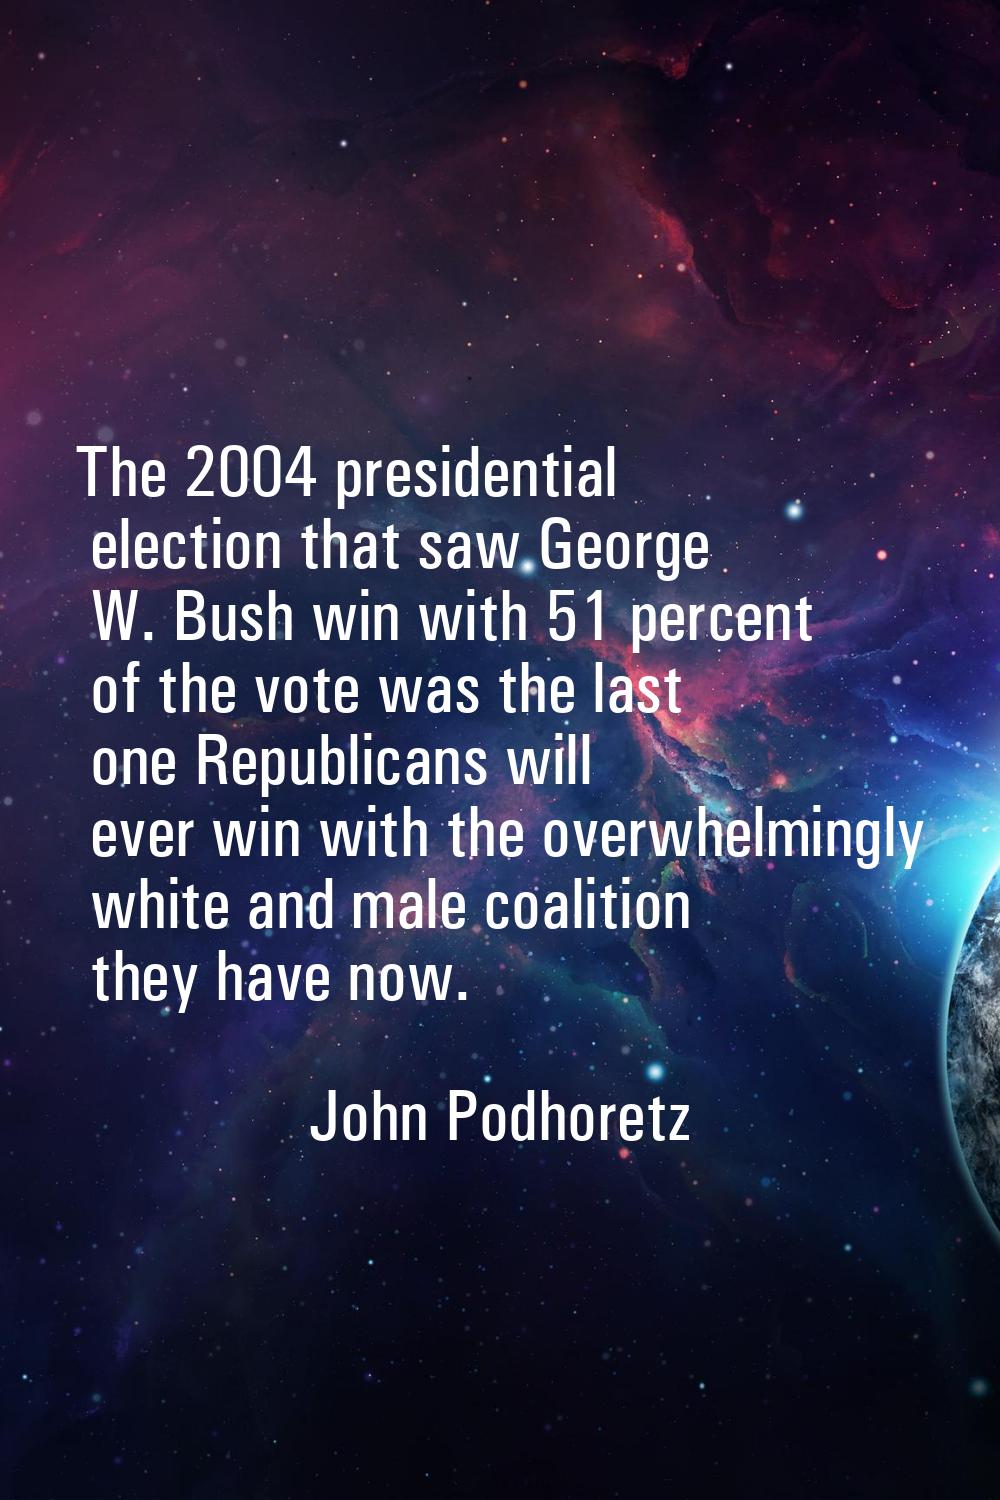 The 2004 presidential election that saw George W. Bush win with 51 percent of the vote was the last